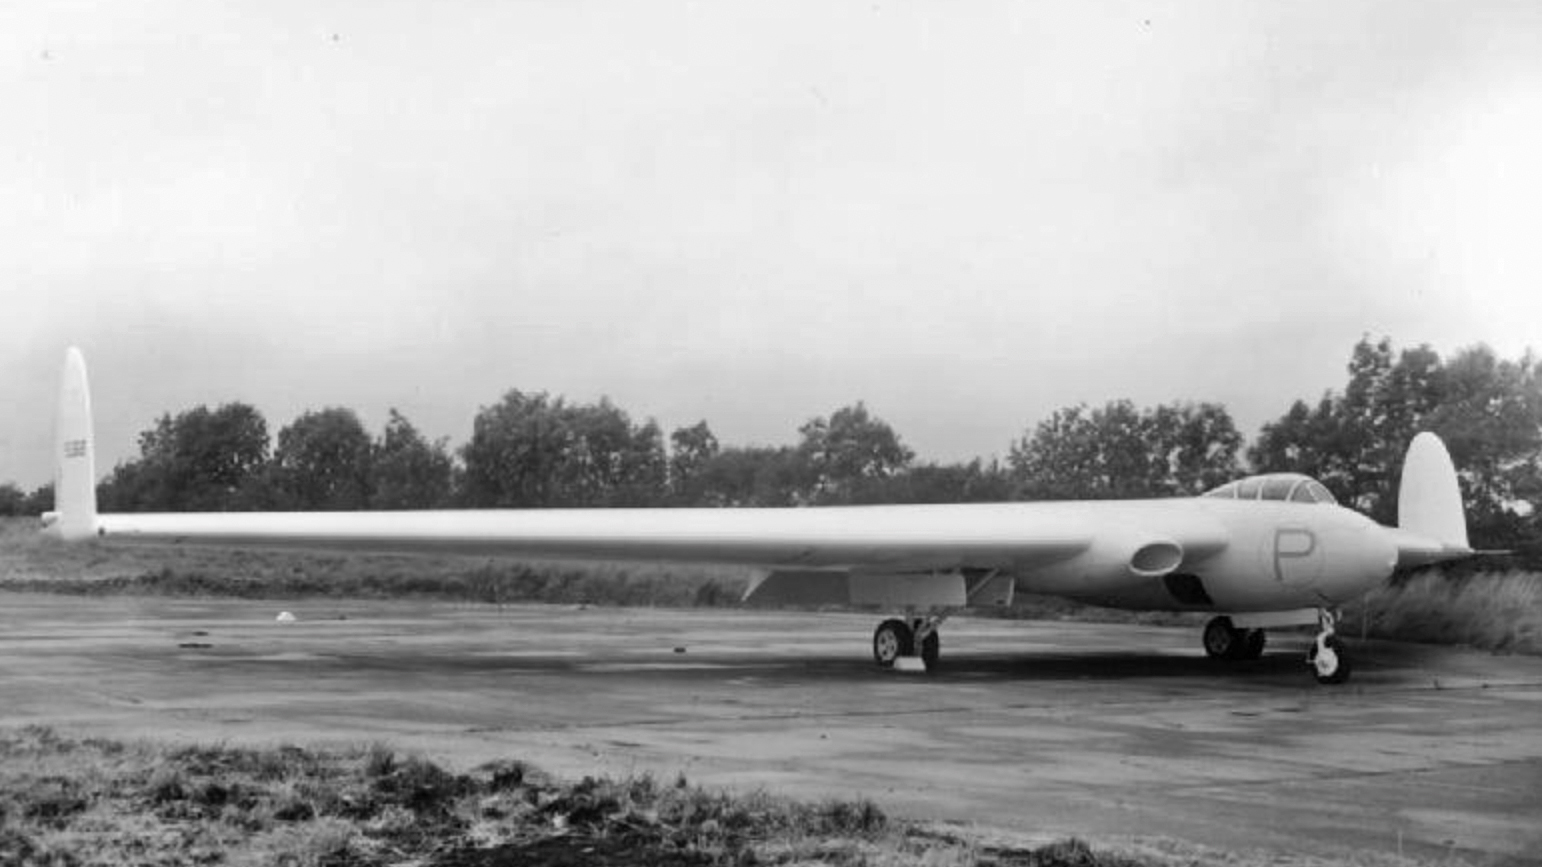 Armstrong Whitworth AW52 early flying wing aircraft designed and produced by British aircraft manufacturer Armstrong Whitworth Aircraft.